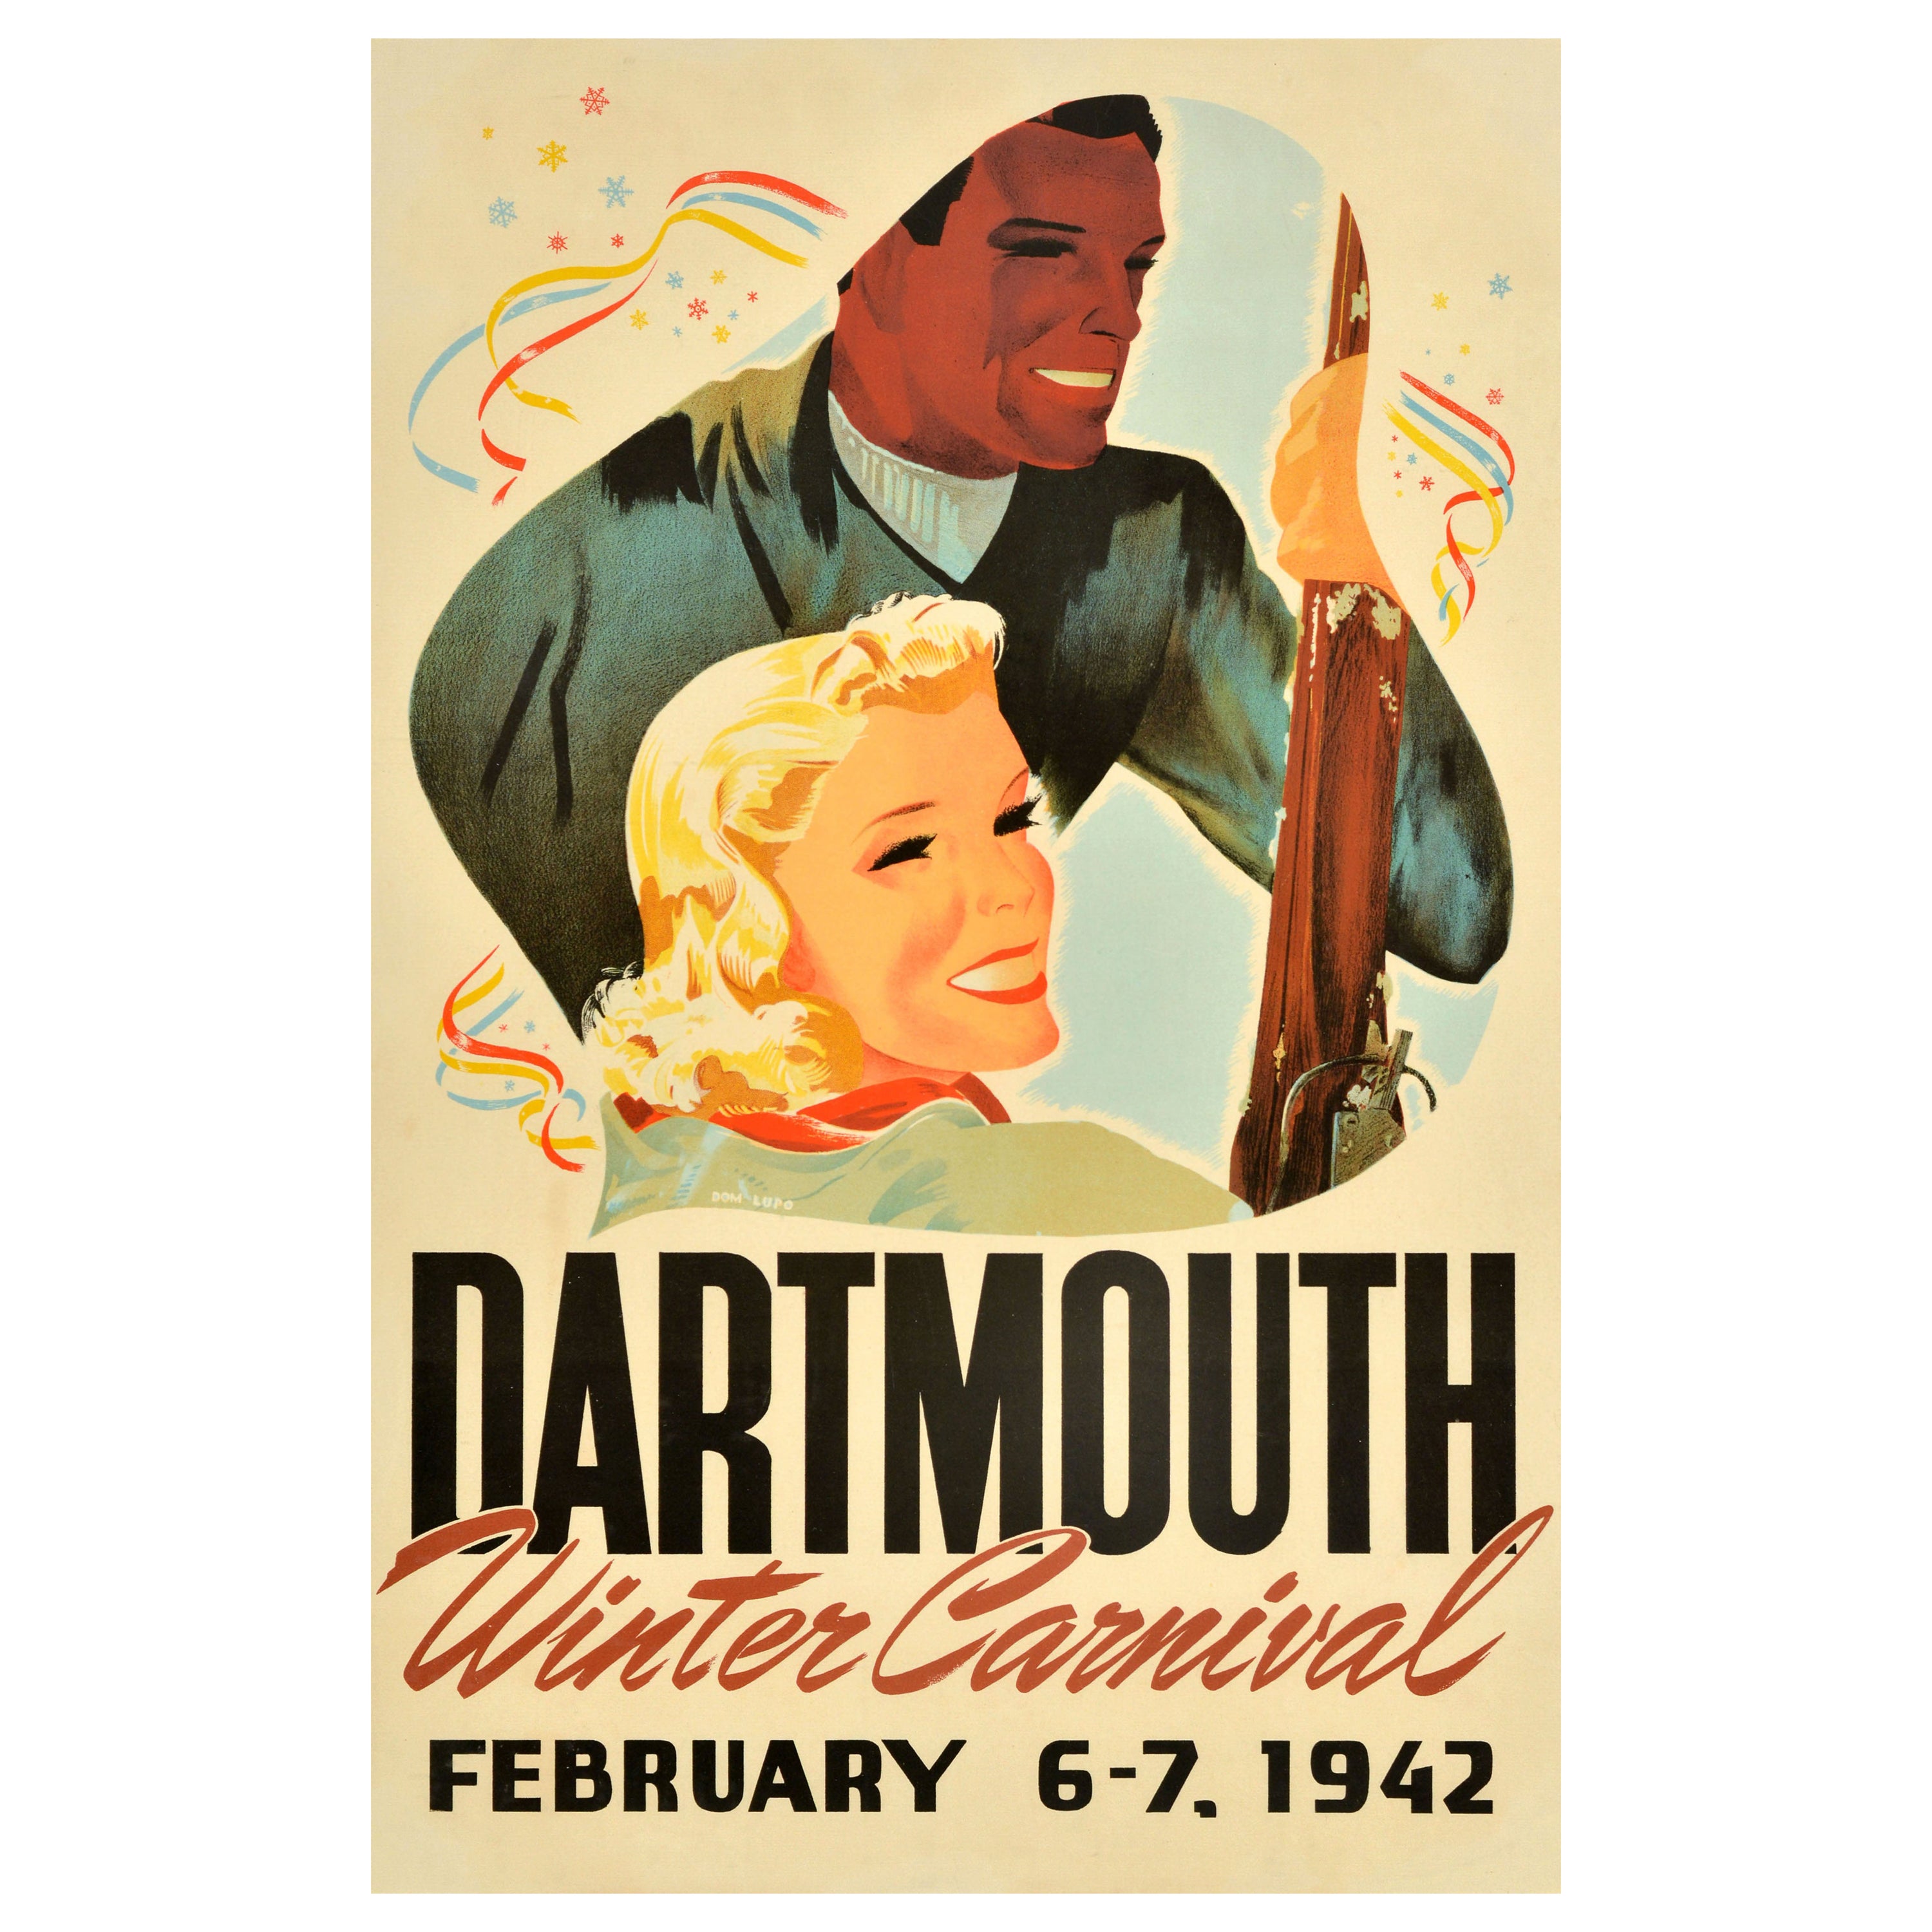 Antique and Vintage Posters - 7,437 For Sale at 1stDibs - Page 7 